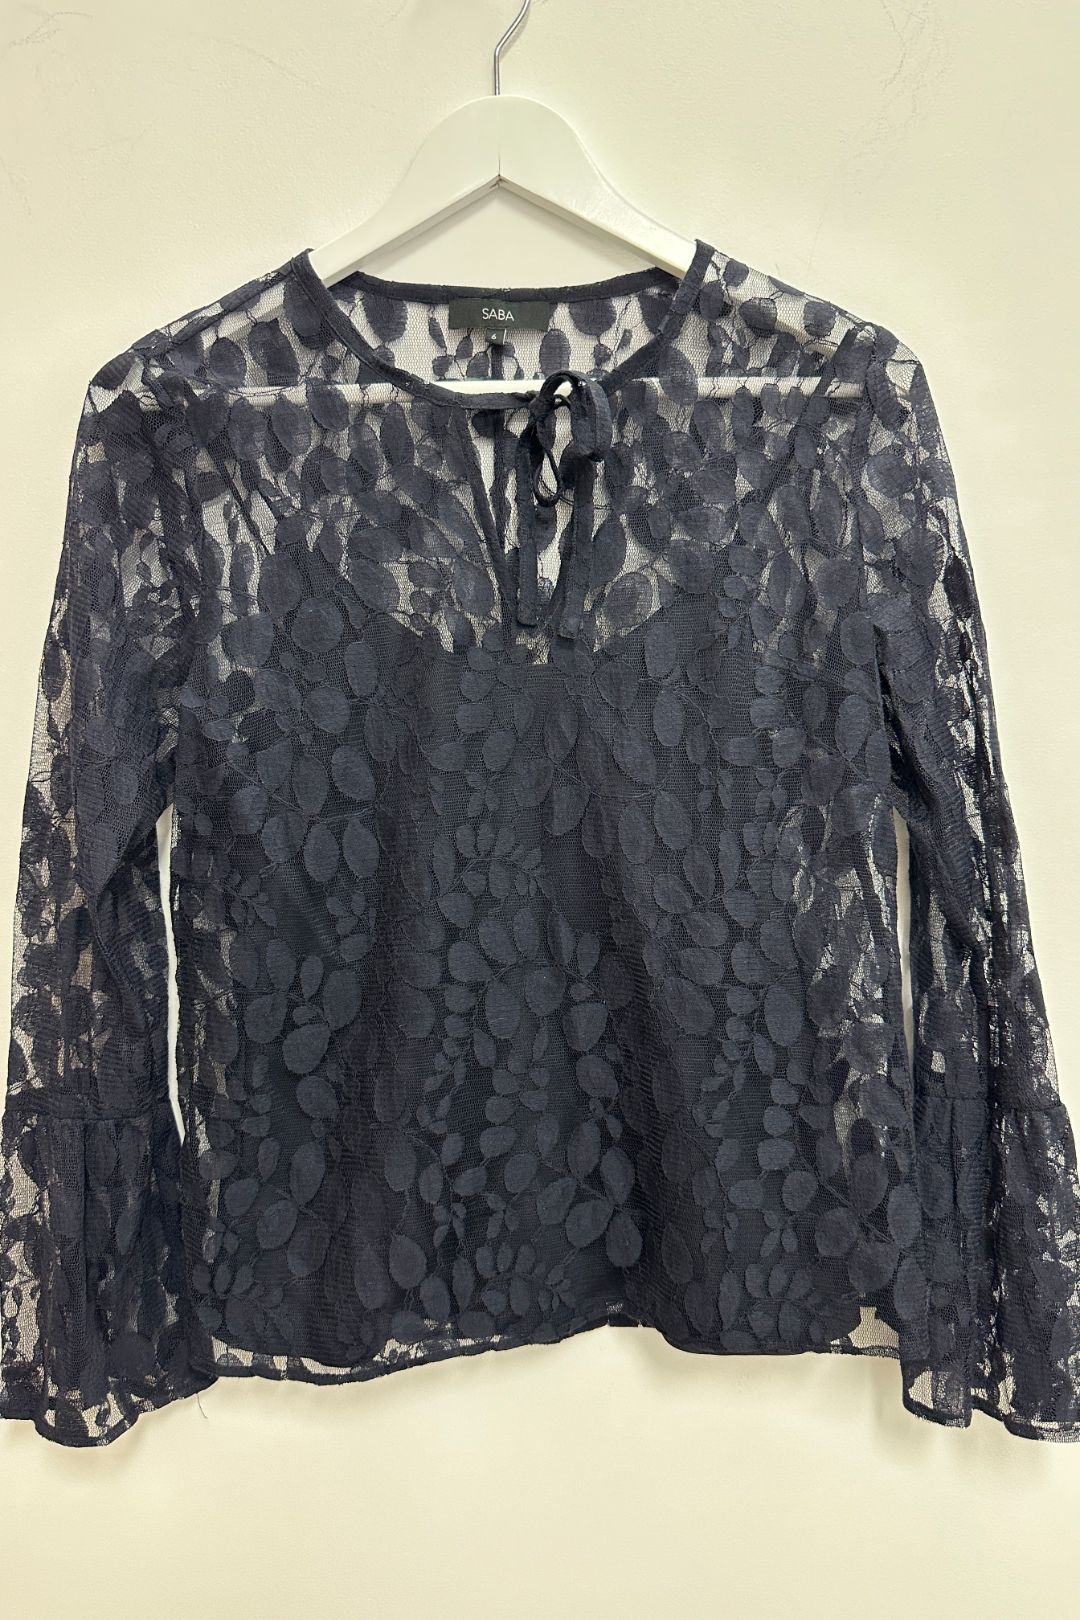 Saba Navy Leaf Lace Sheer Shirt with Cami